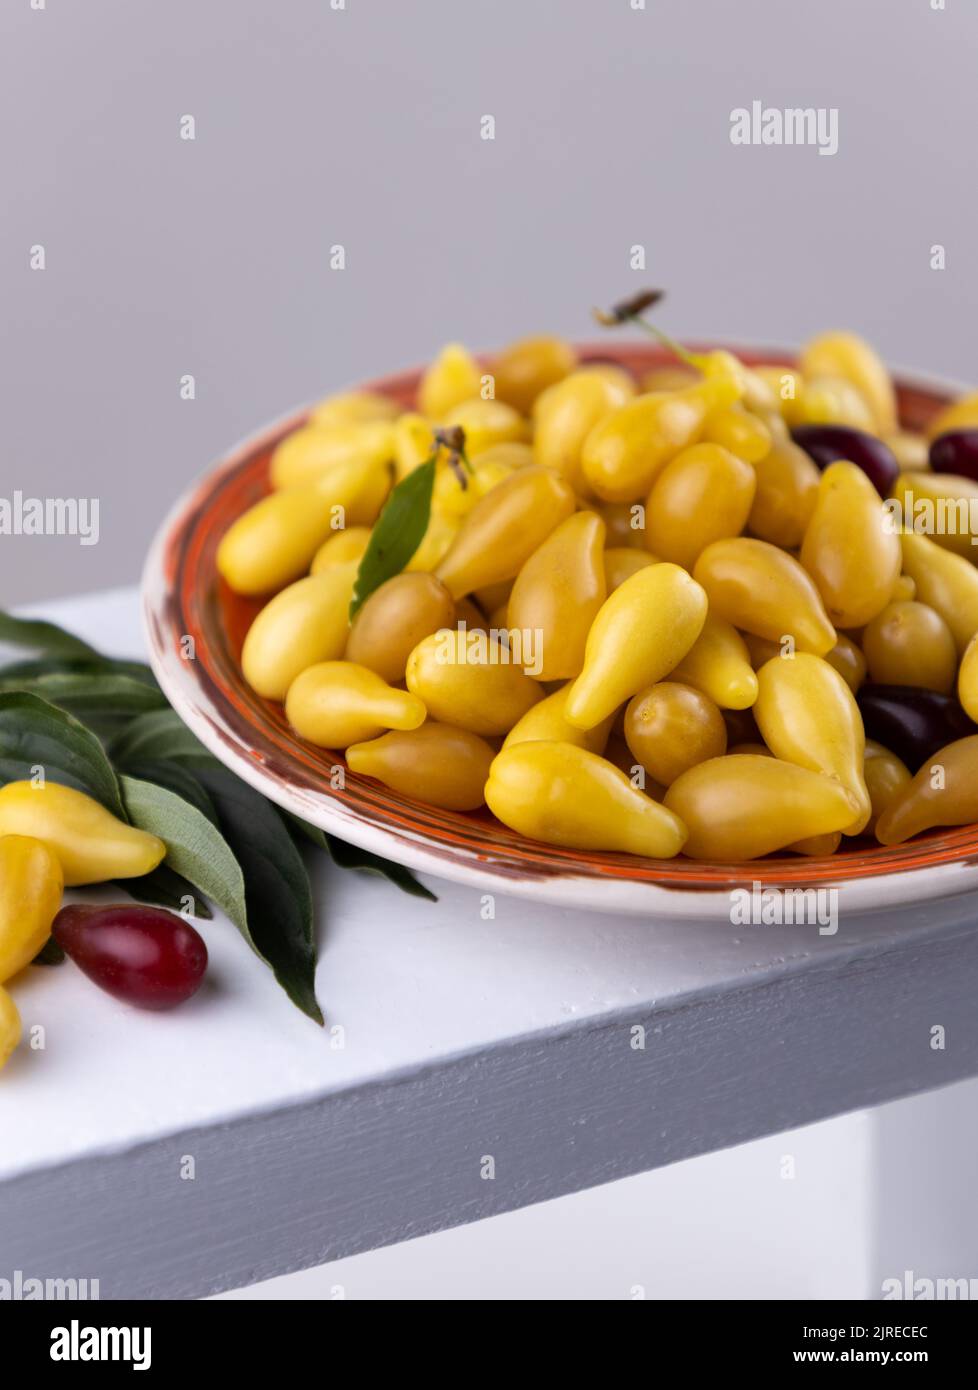 Yellow and red Cornelian cherry dogwood or cornus mas beries. Healthy low carb berry. Pulpy, sweet and sour fruit. Selective focus. Stock Photo